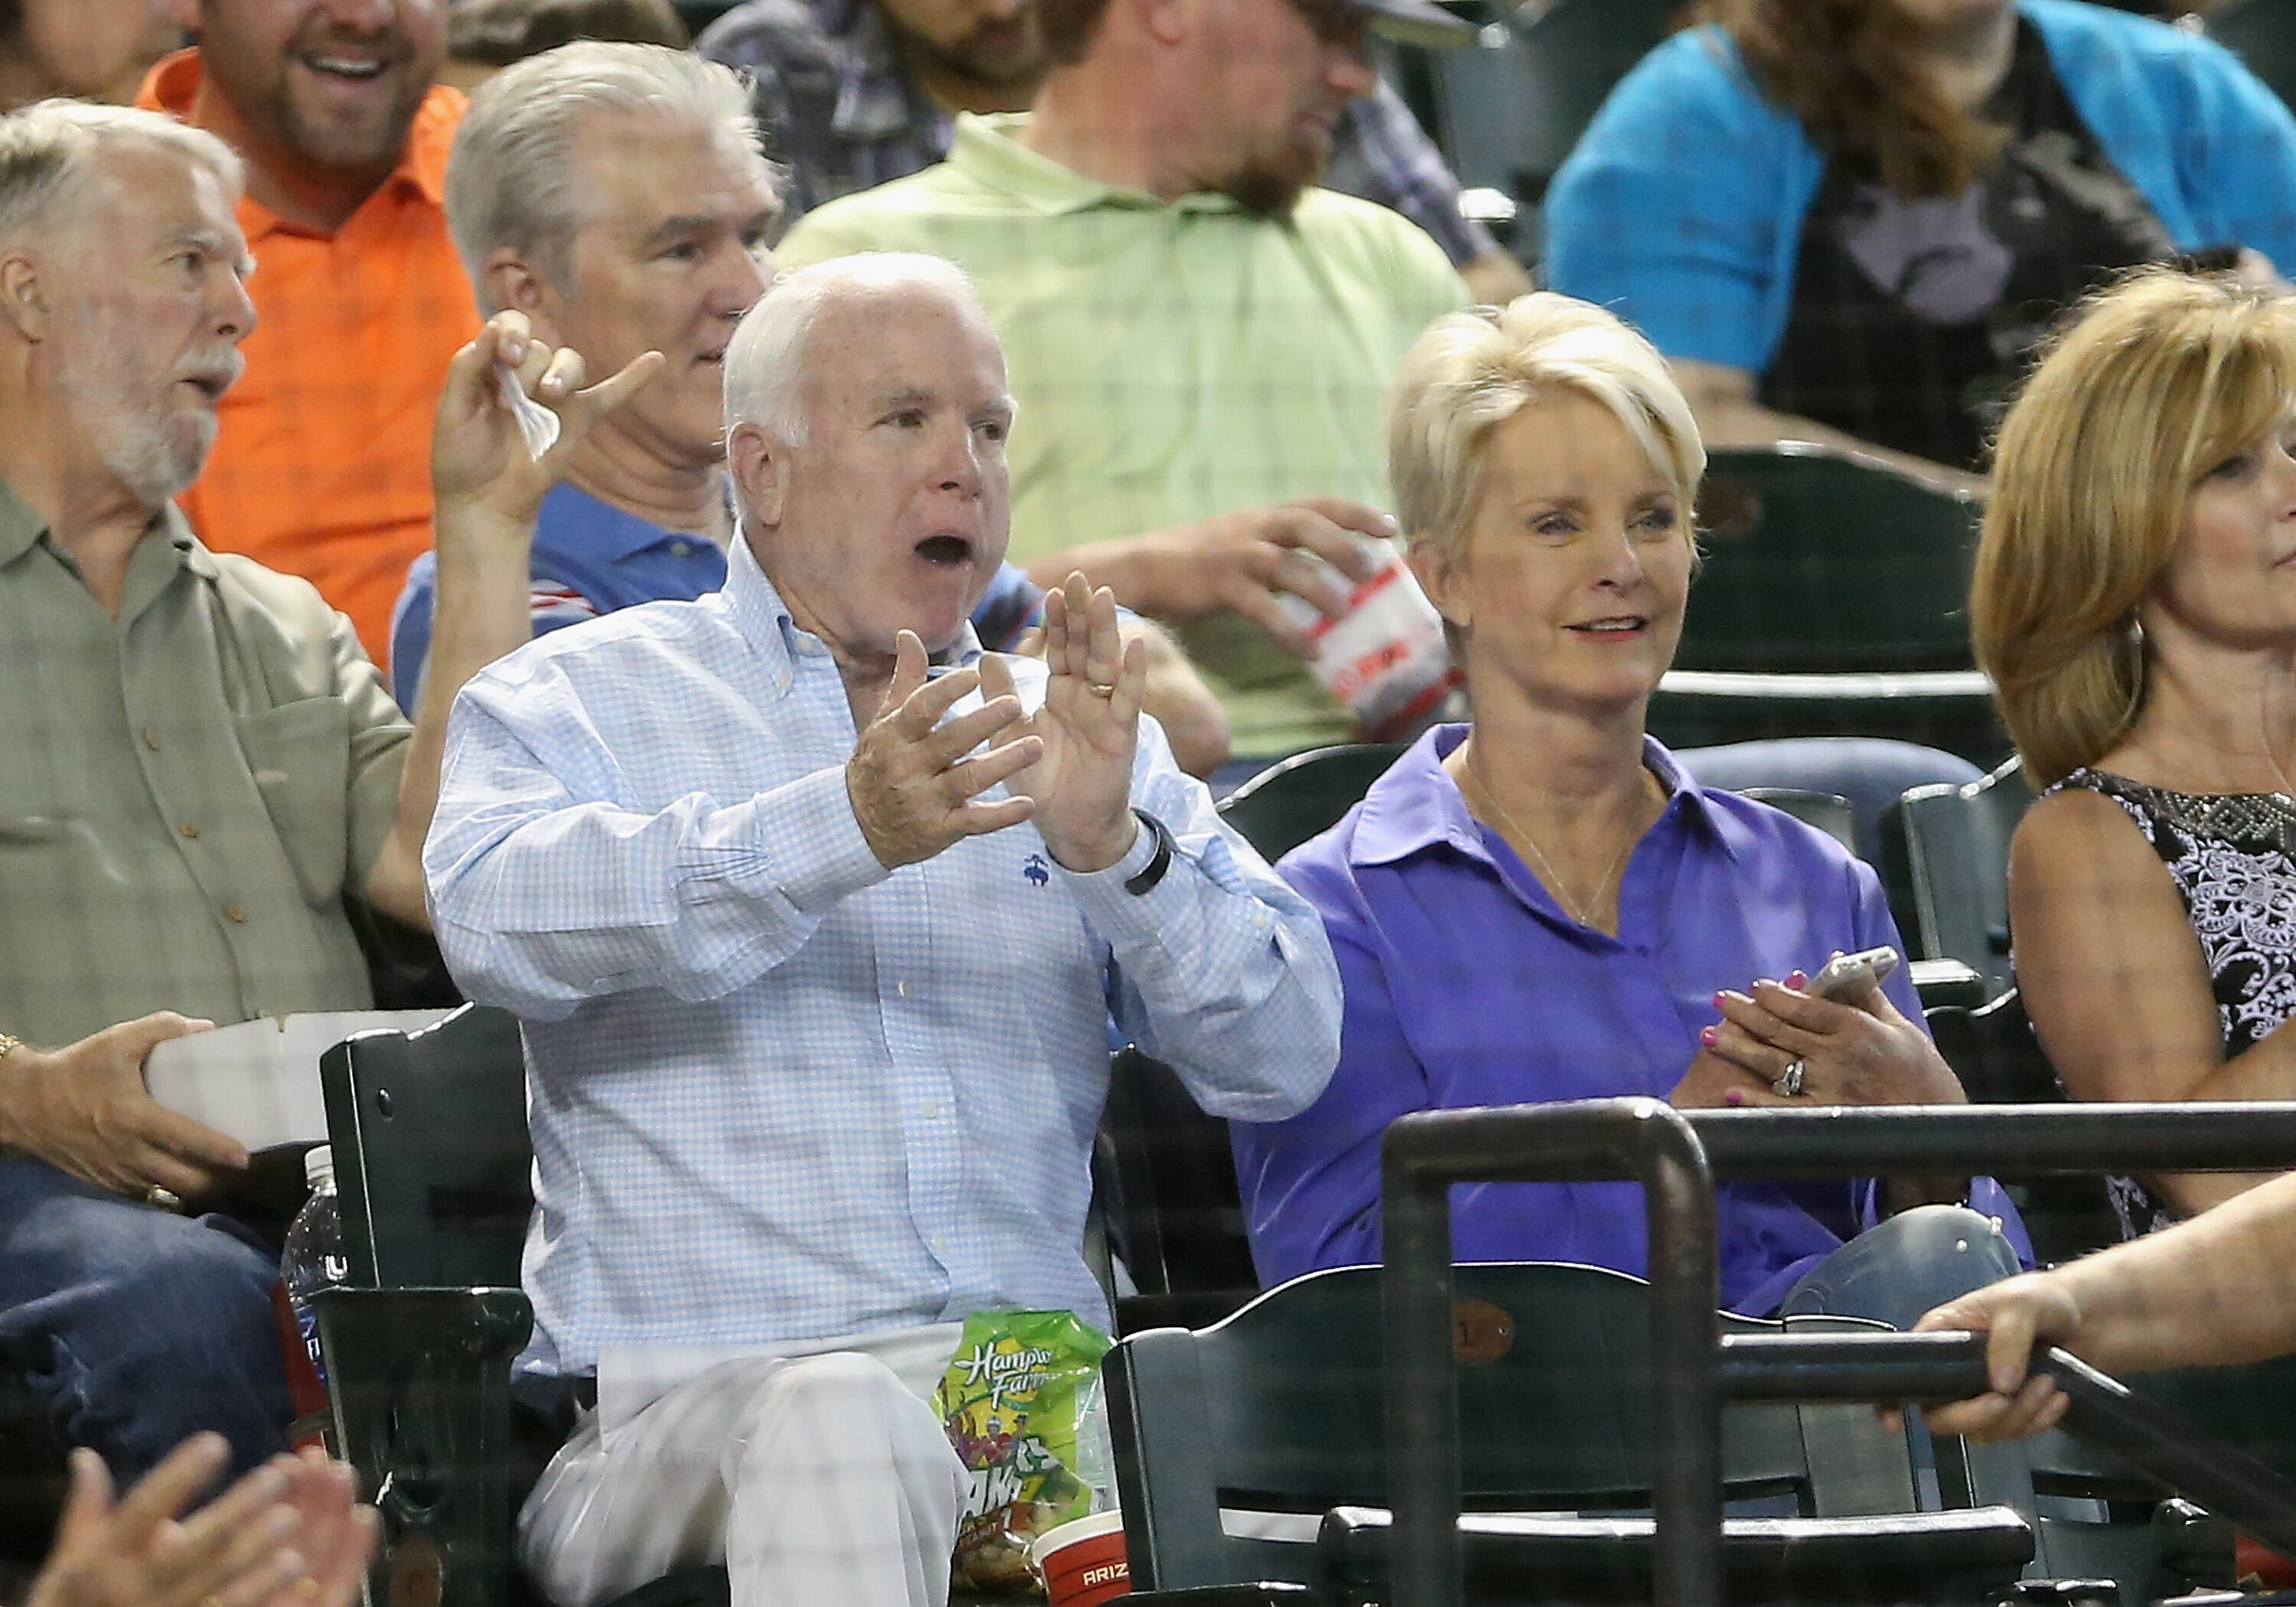 PHOENIX, AZ - MAY 17:  U.S. Senator John McCain (R-AZ) and wife Cindy attend the MLB game between the Arizona Diamondbacks and the Los Angeles Dodgers at Chase Field on May 17, 2014 in Phoenix, Arizona.  (Photo by Christian Petersen/Getty Images)